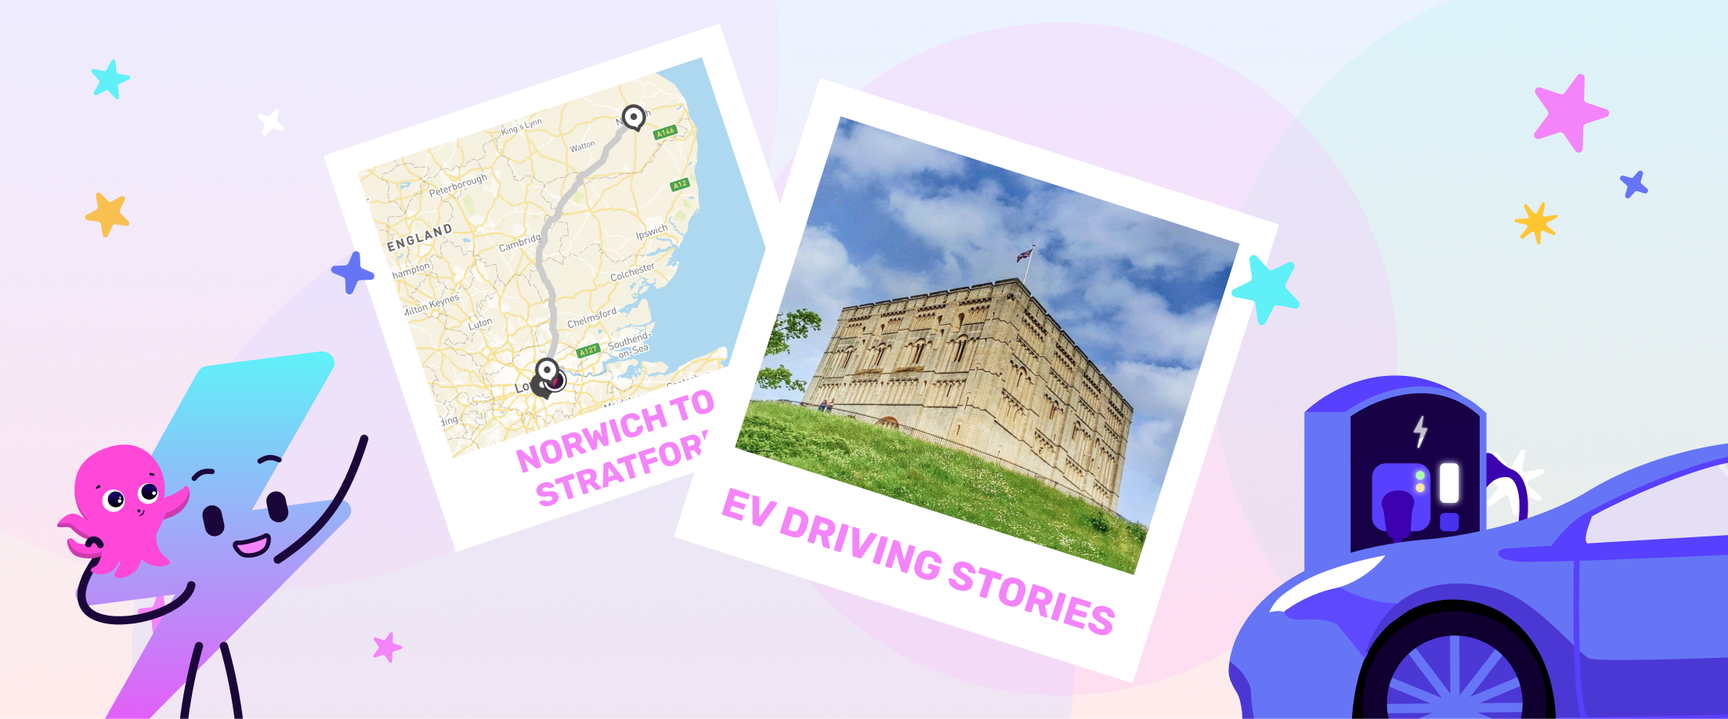 driving stories norwich to stratford, london - header